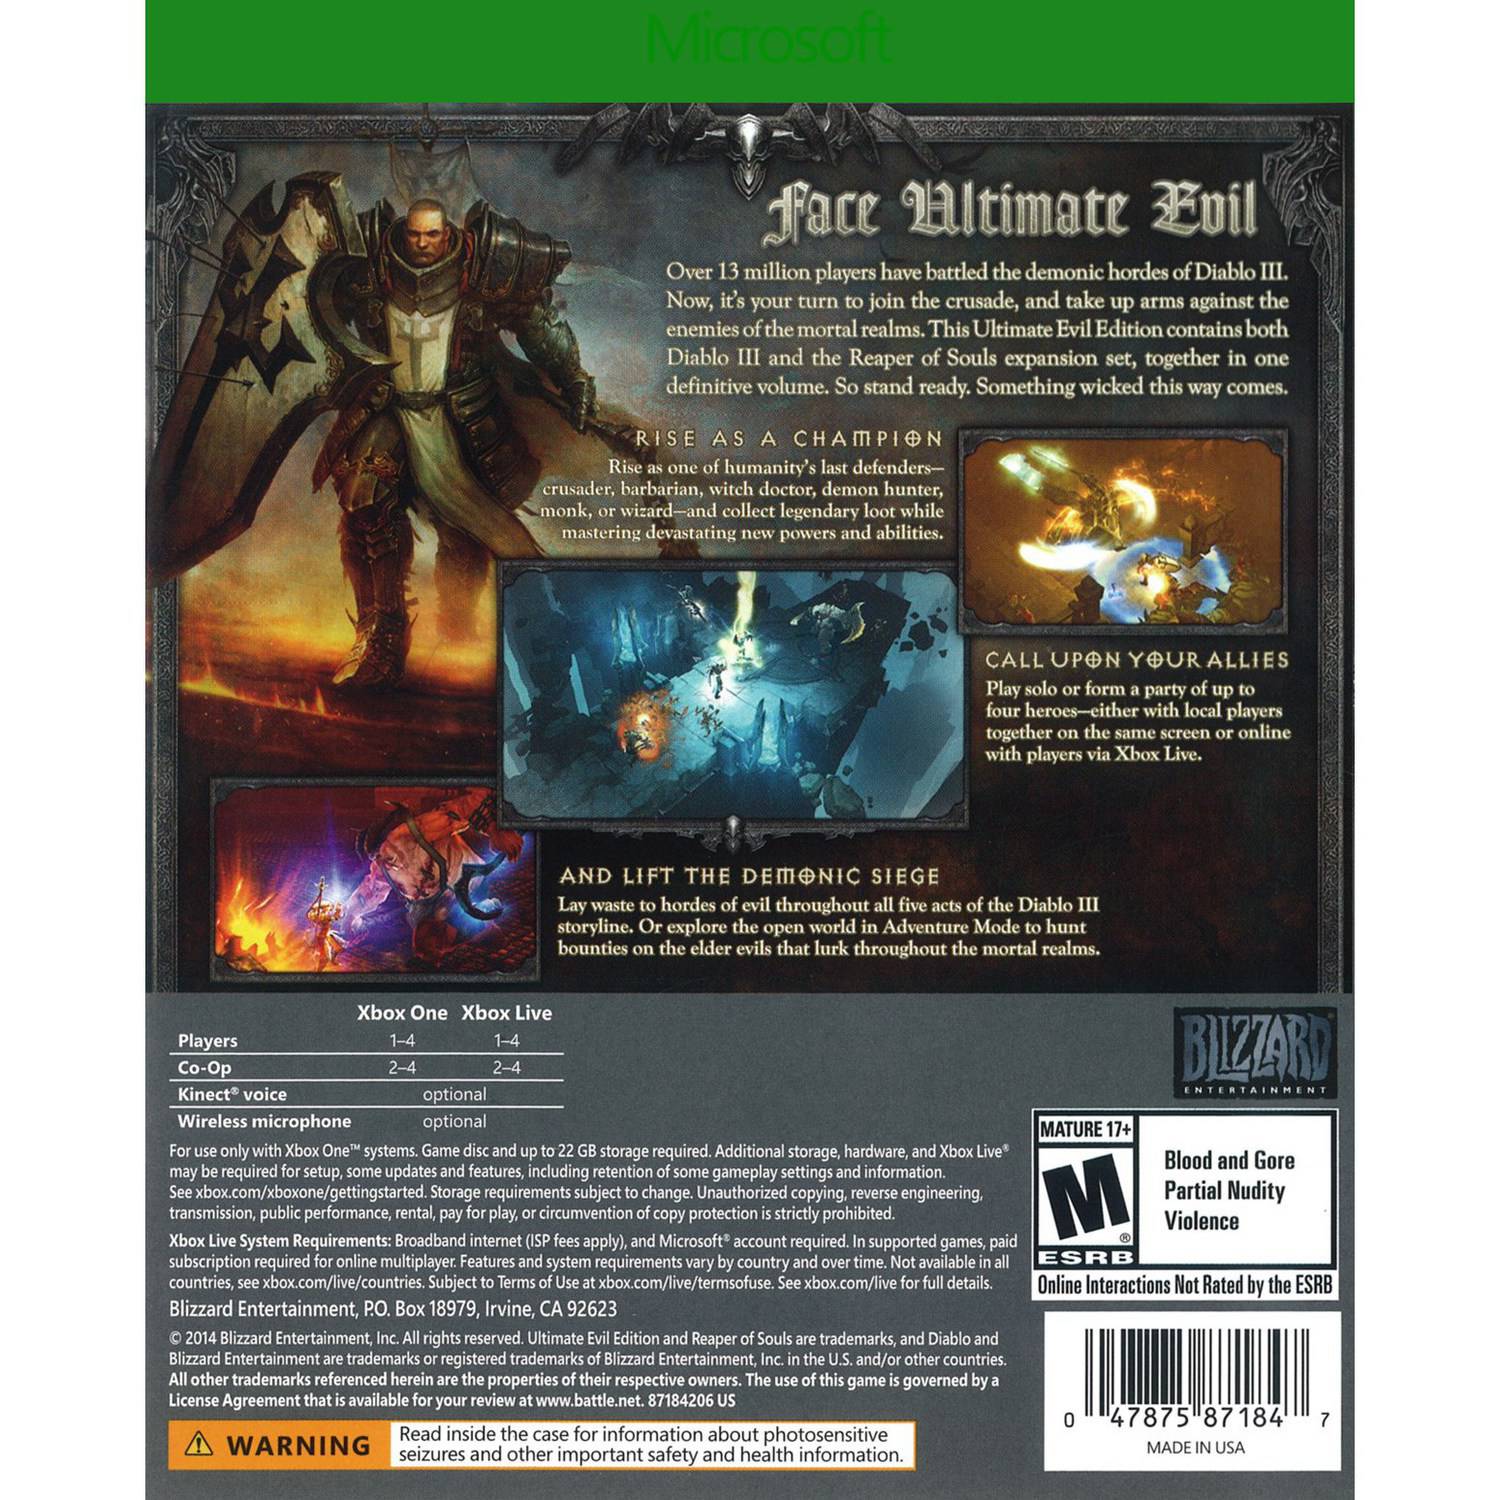 Diablo III Ultimate Evil (Xbox One) - Pre-Owned - image 2 of 8